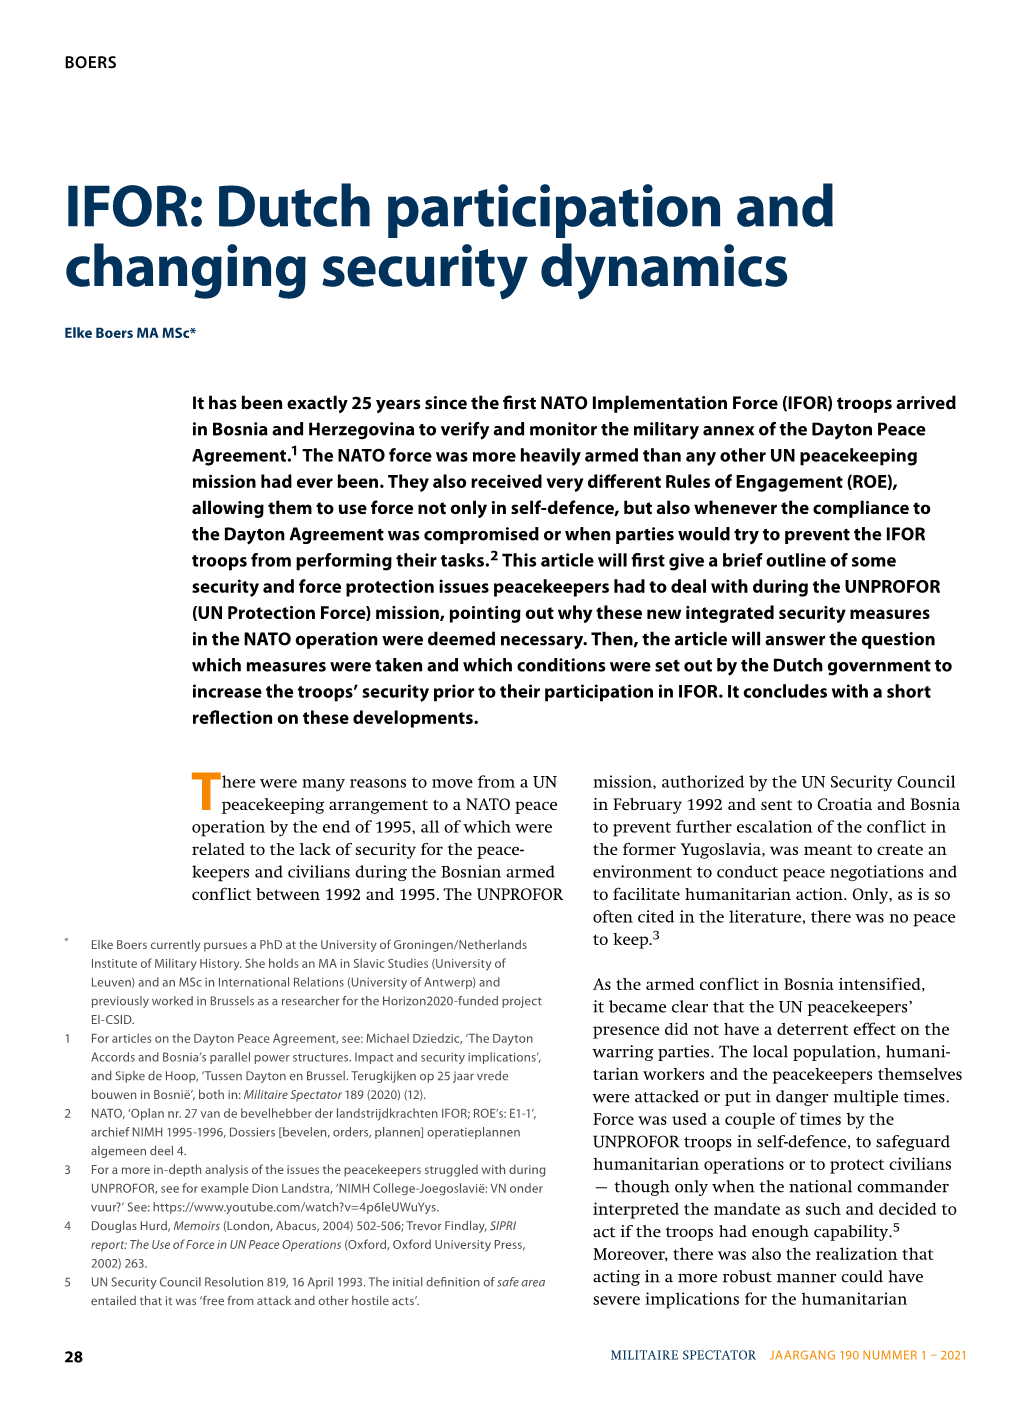 IFOR: Dutch Participation and Changing Security Dynamics